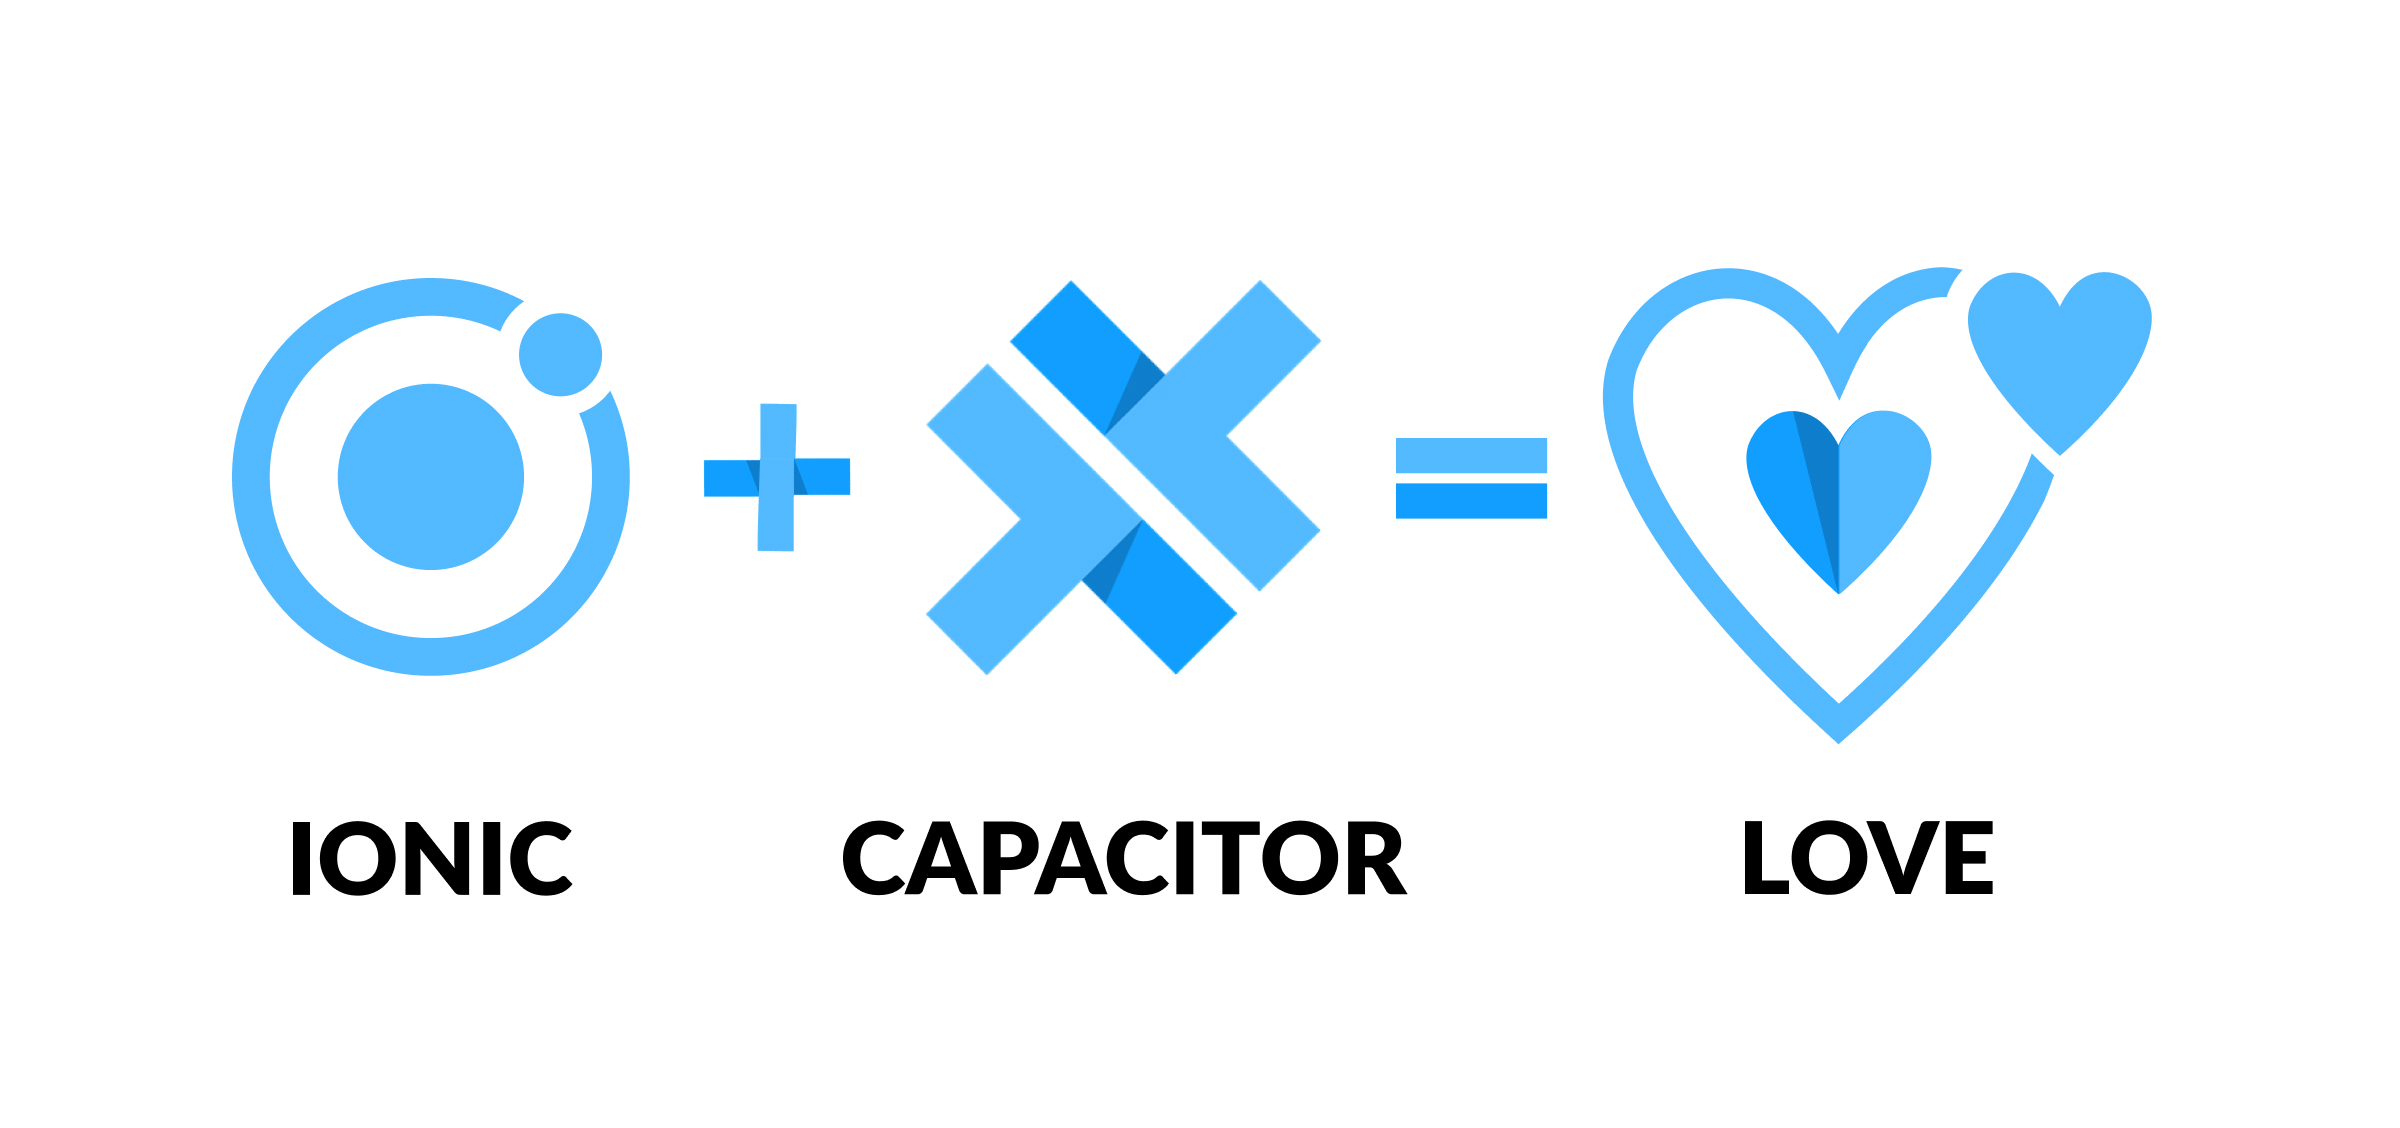 Ionic with Capacitor